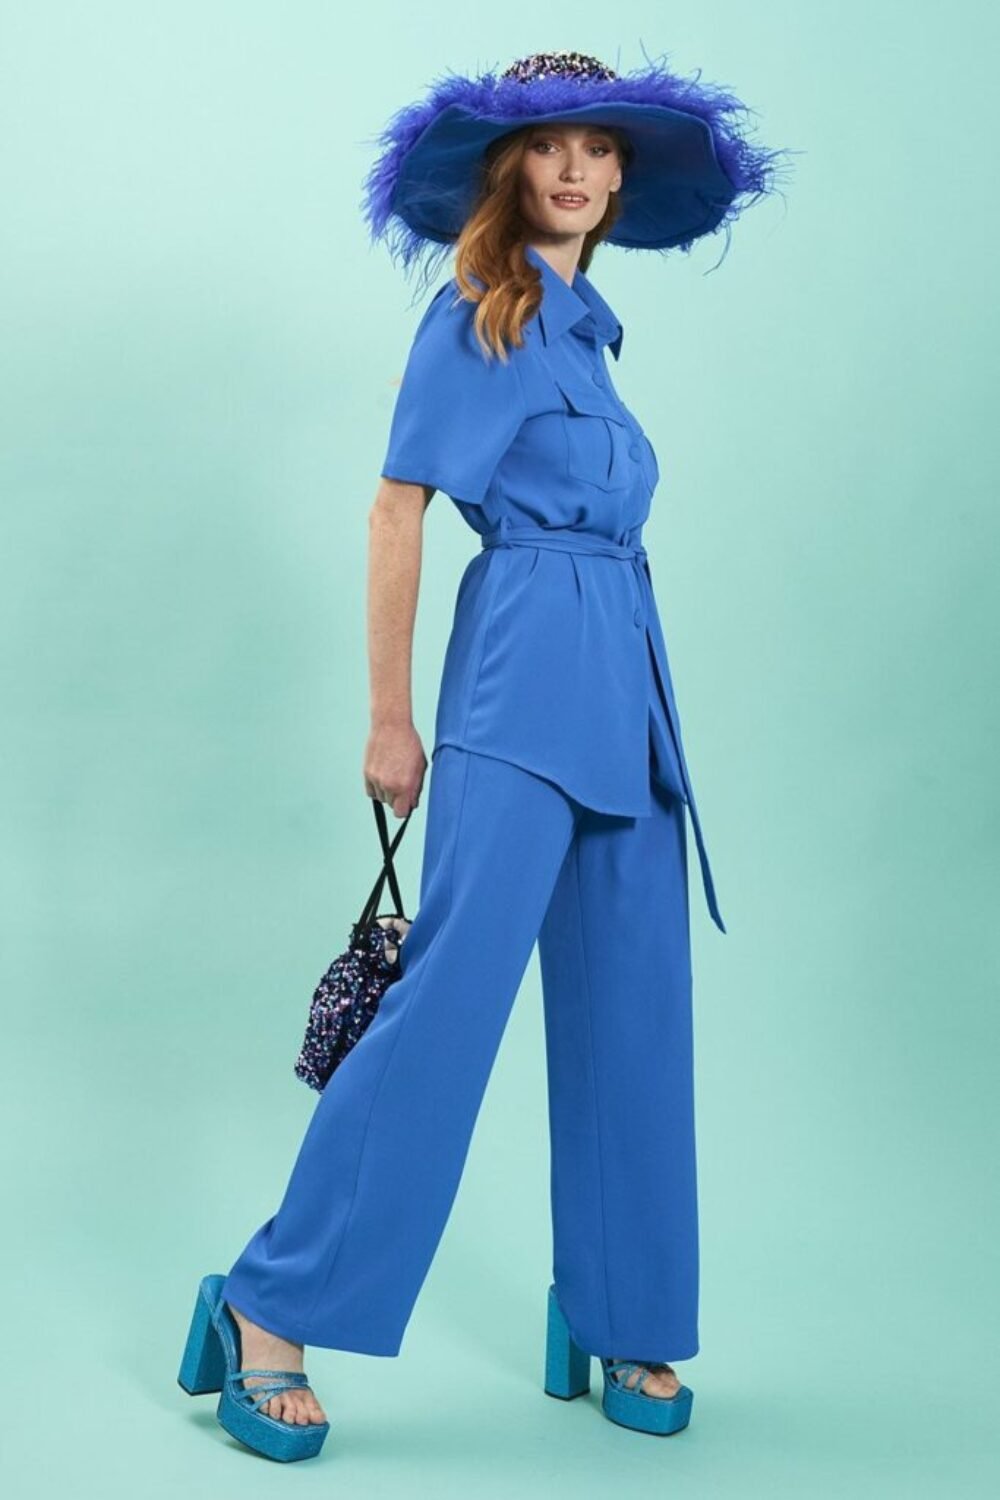 Shop Blue Wide Leg Trousers and women's luxury and designer clothes at www.lux-apparel.co.uk